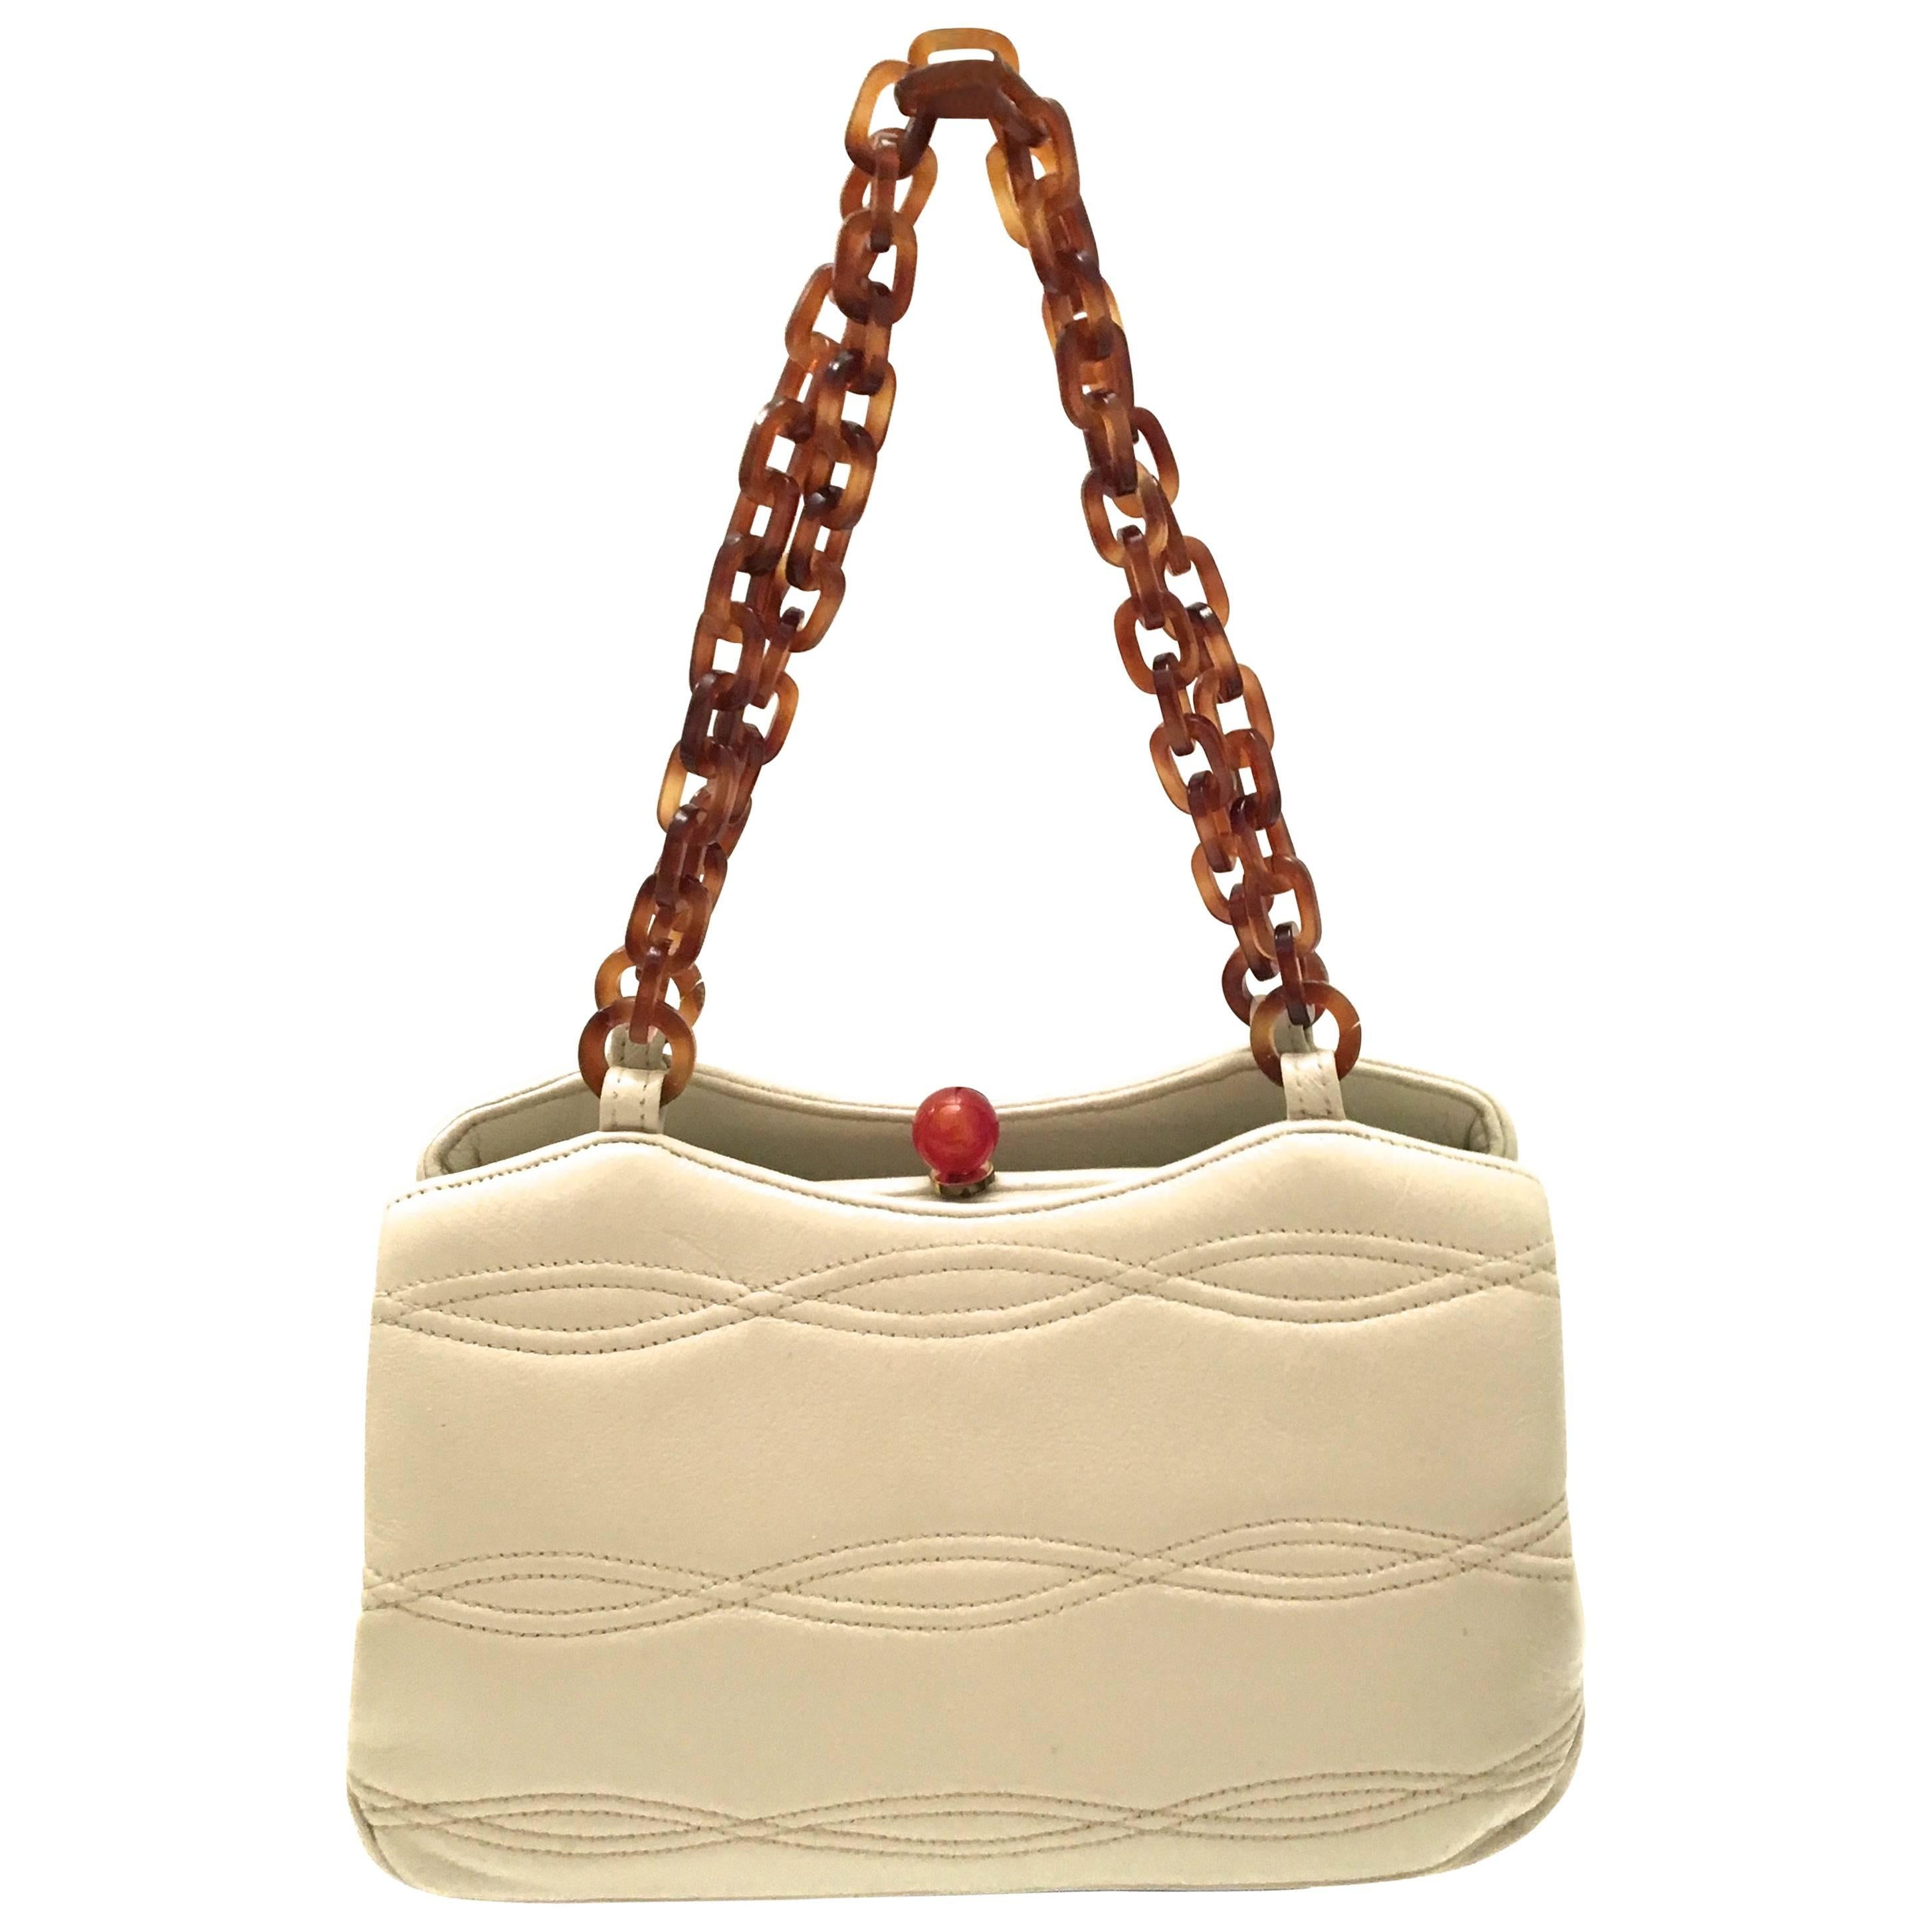 Rare 1950's Morris Moscowitz Beige Leather Purse - Bakelite Hardware For Sale